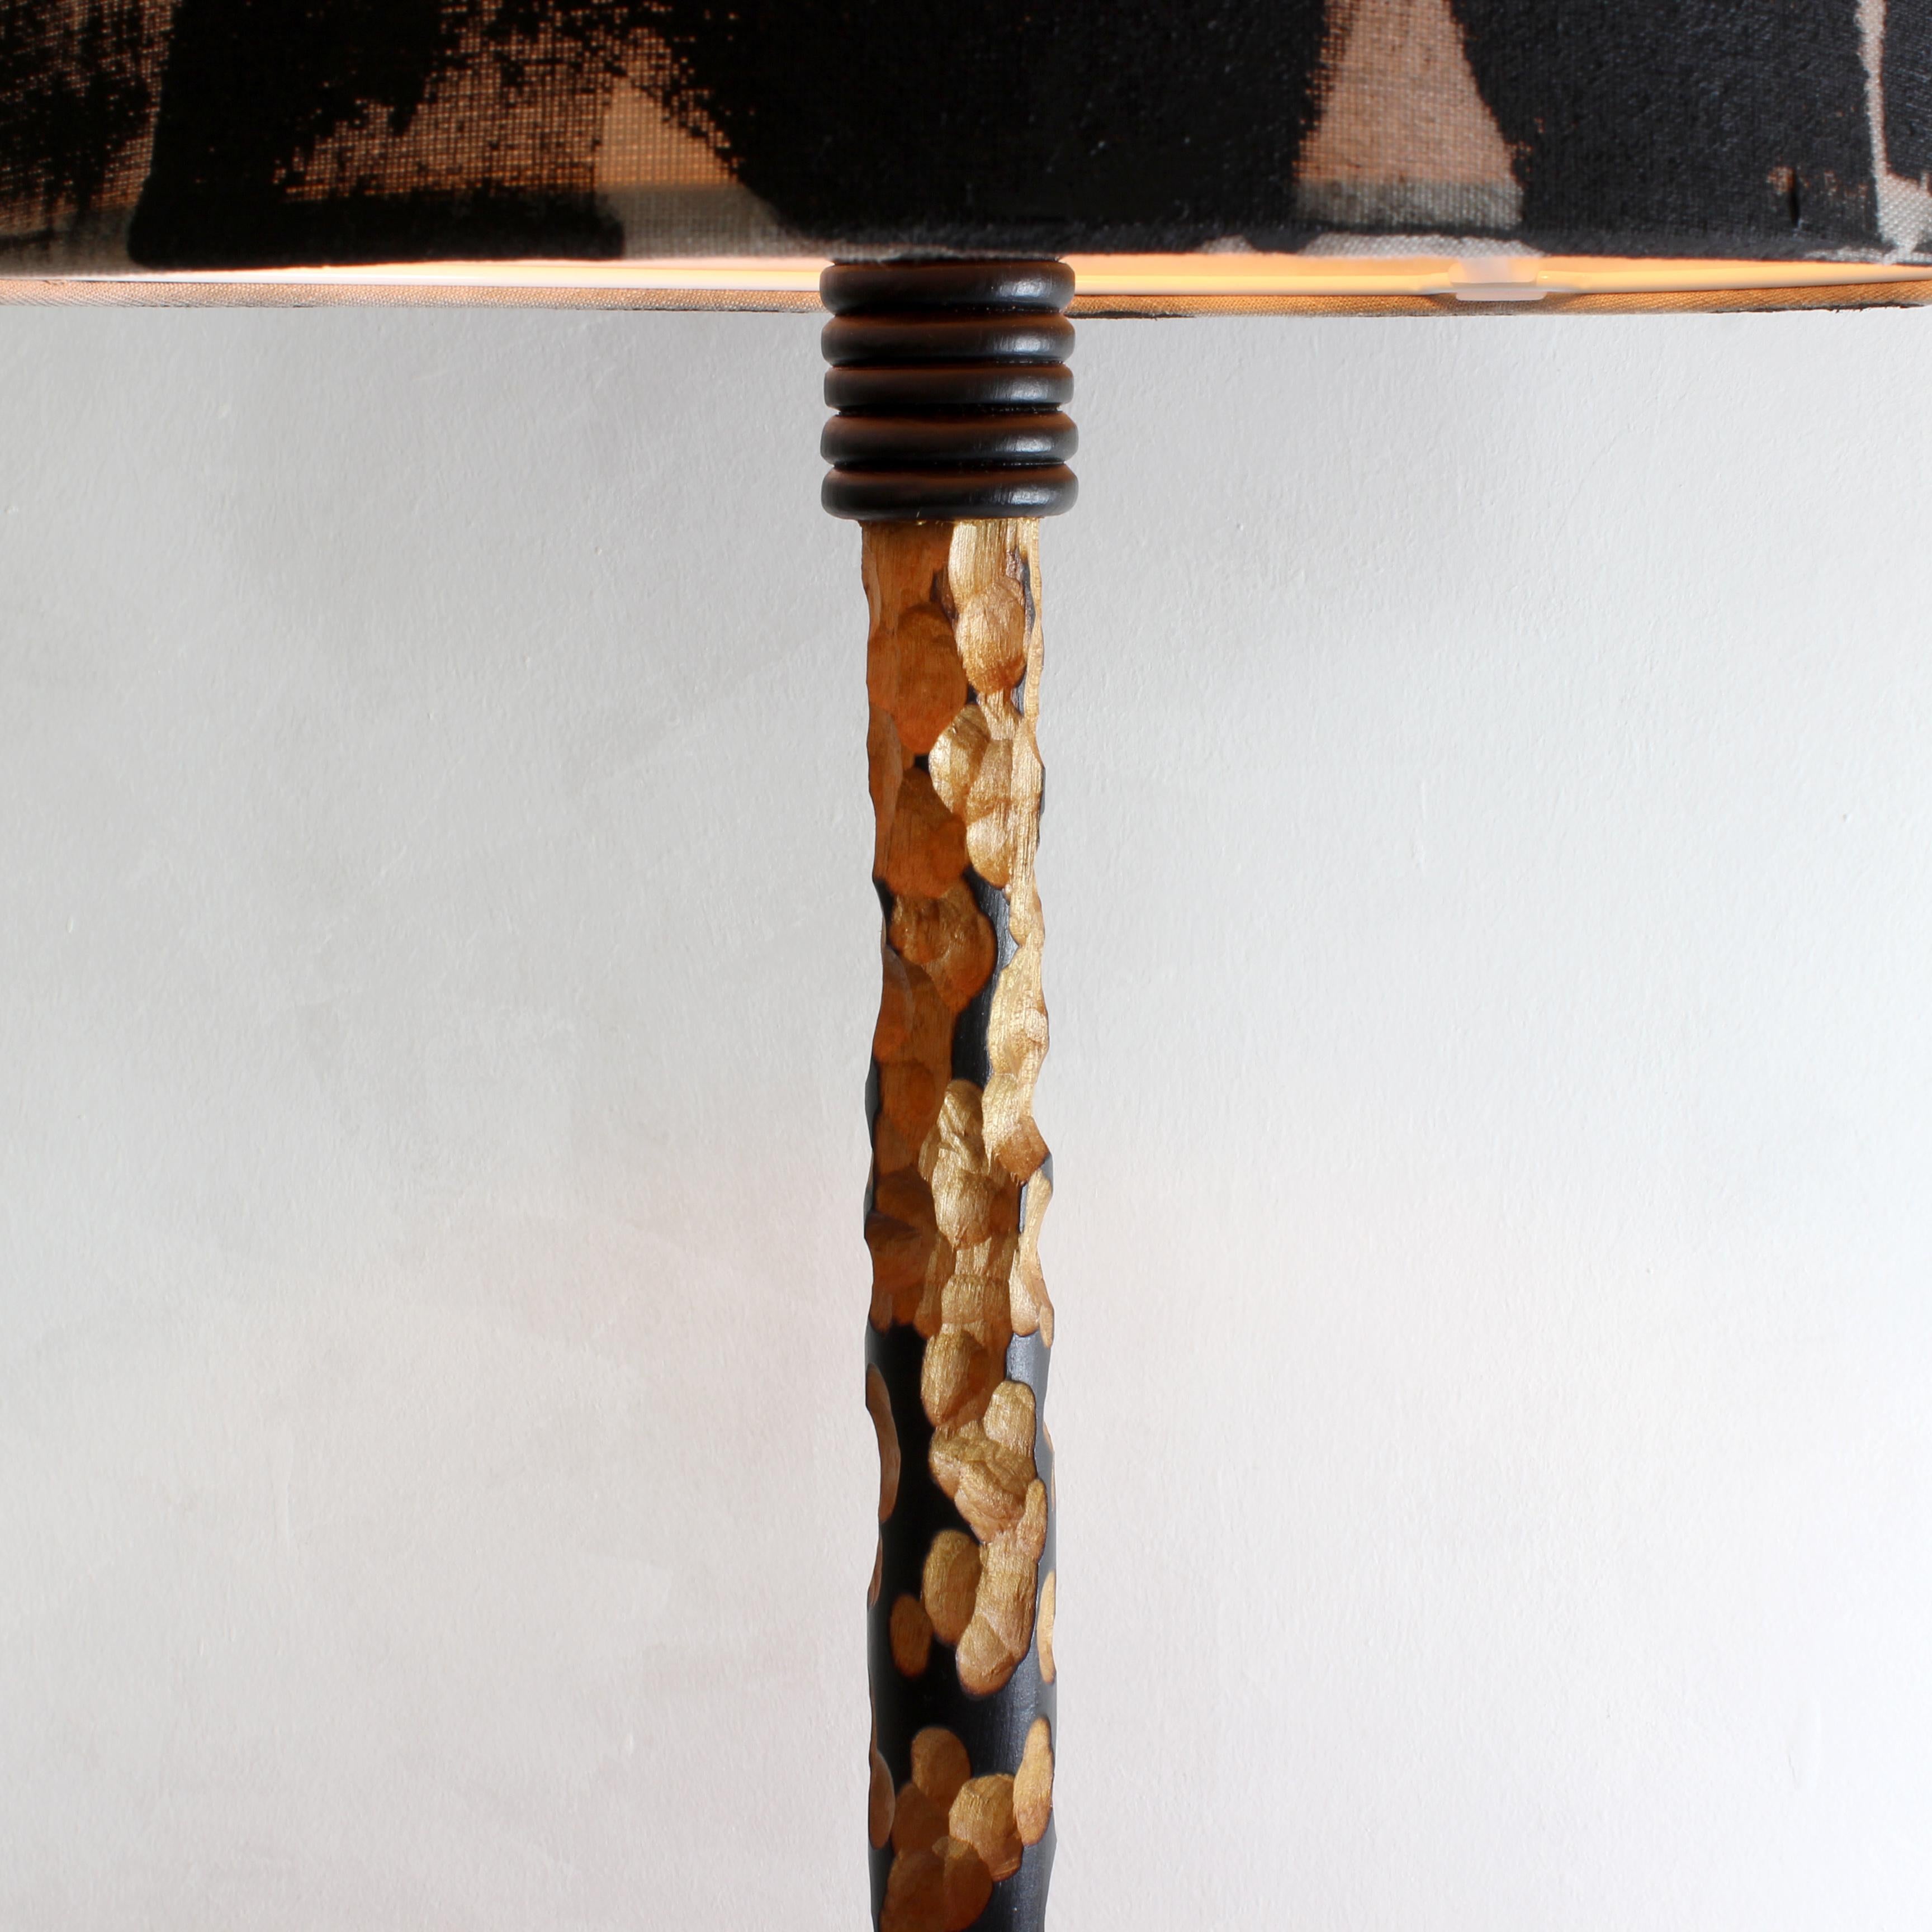 Hungarian Rocket, Unique Sculptural Lighting, Floor Lamp from Reclaimed Burned Wood For Sale